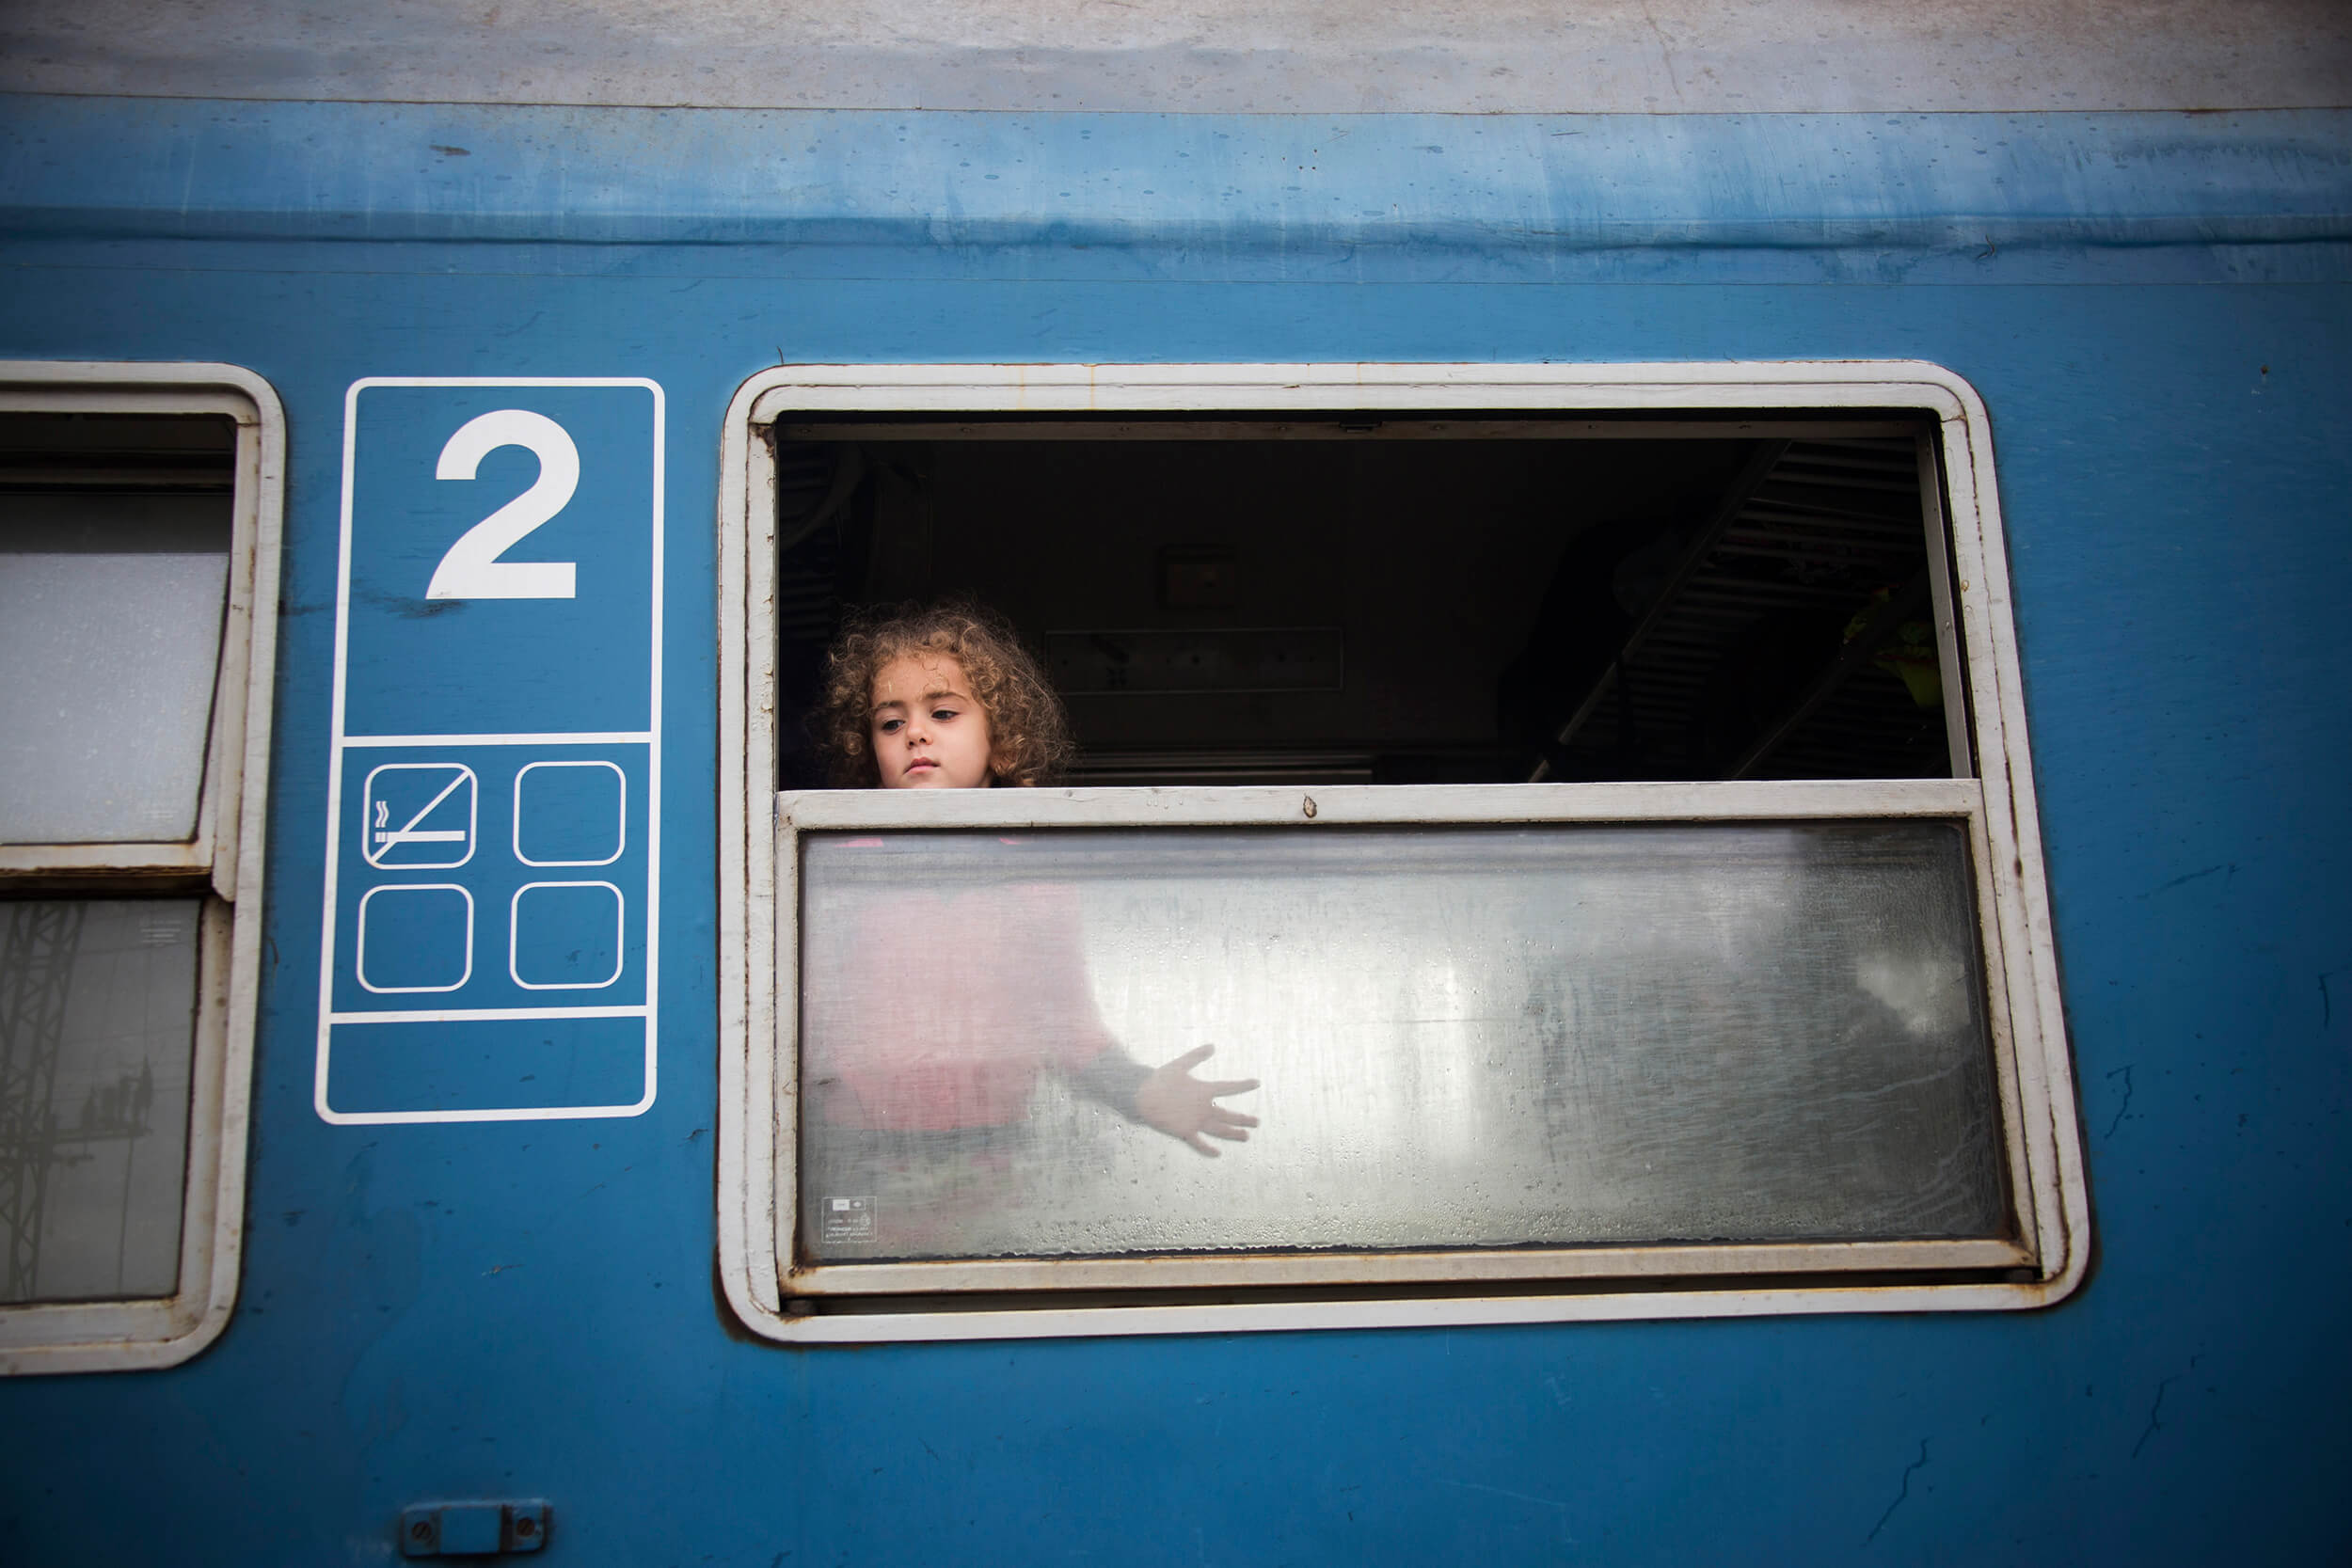  Hungaria. October 2015.Refugees from Syria, Afghanistan and Iraq arrive by train to the Hungarian border station Hegyeshalom, three kilometers walk to the border with Austria, to Nickelsdorf, for further transportation by bus to Vienna. 